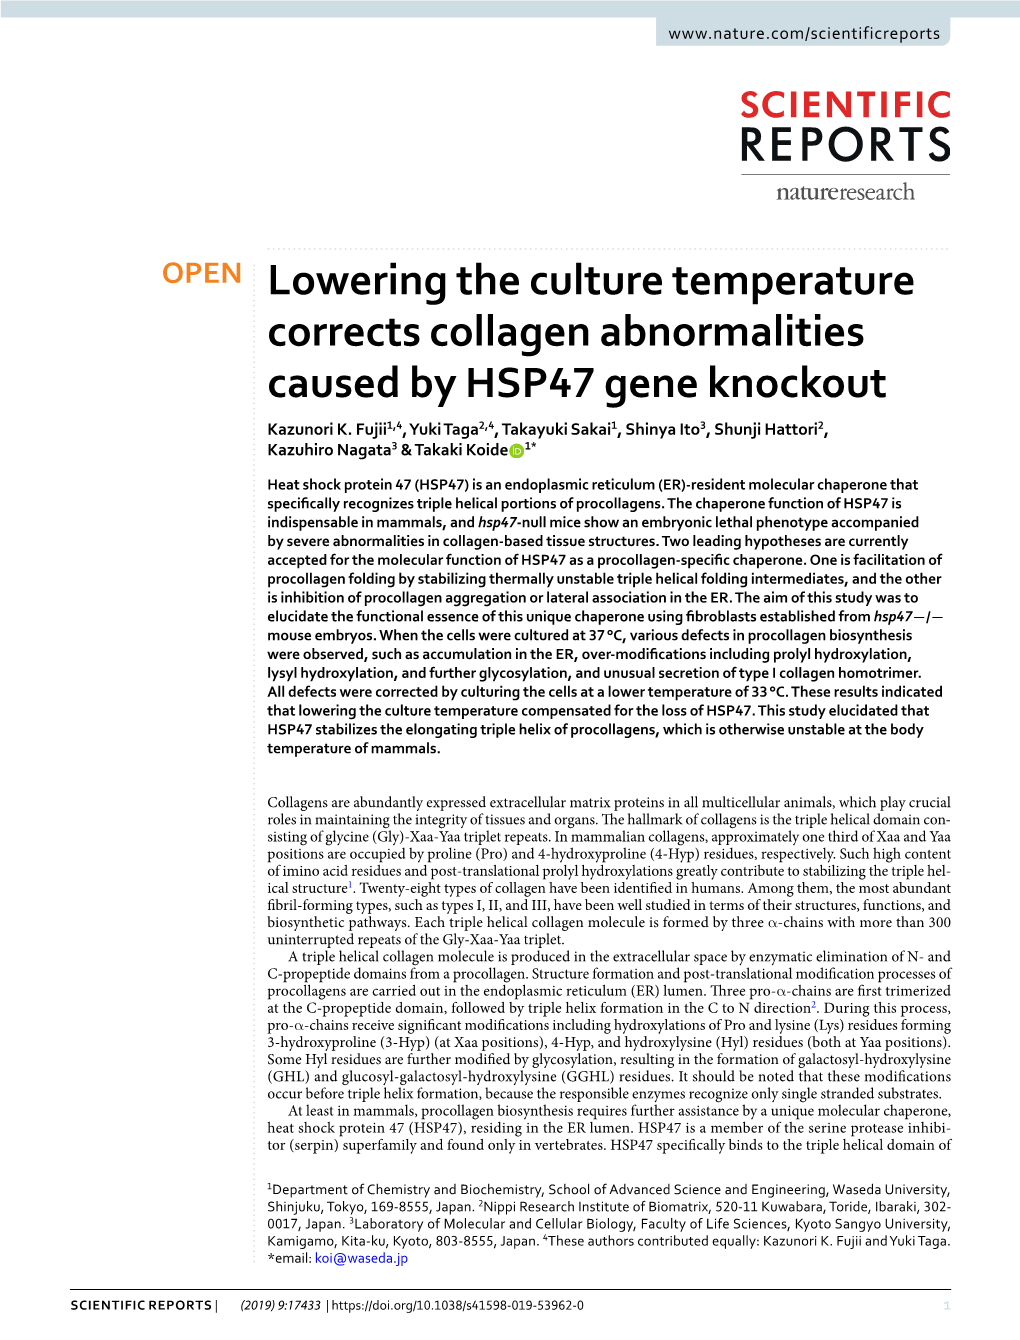 Lowering the Culture Temperature Corrects Collagen Abnormalities Caused by HSP47 Gene Knockout Kazunori K